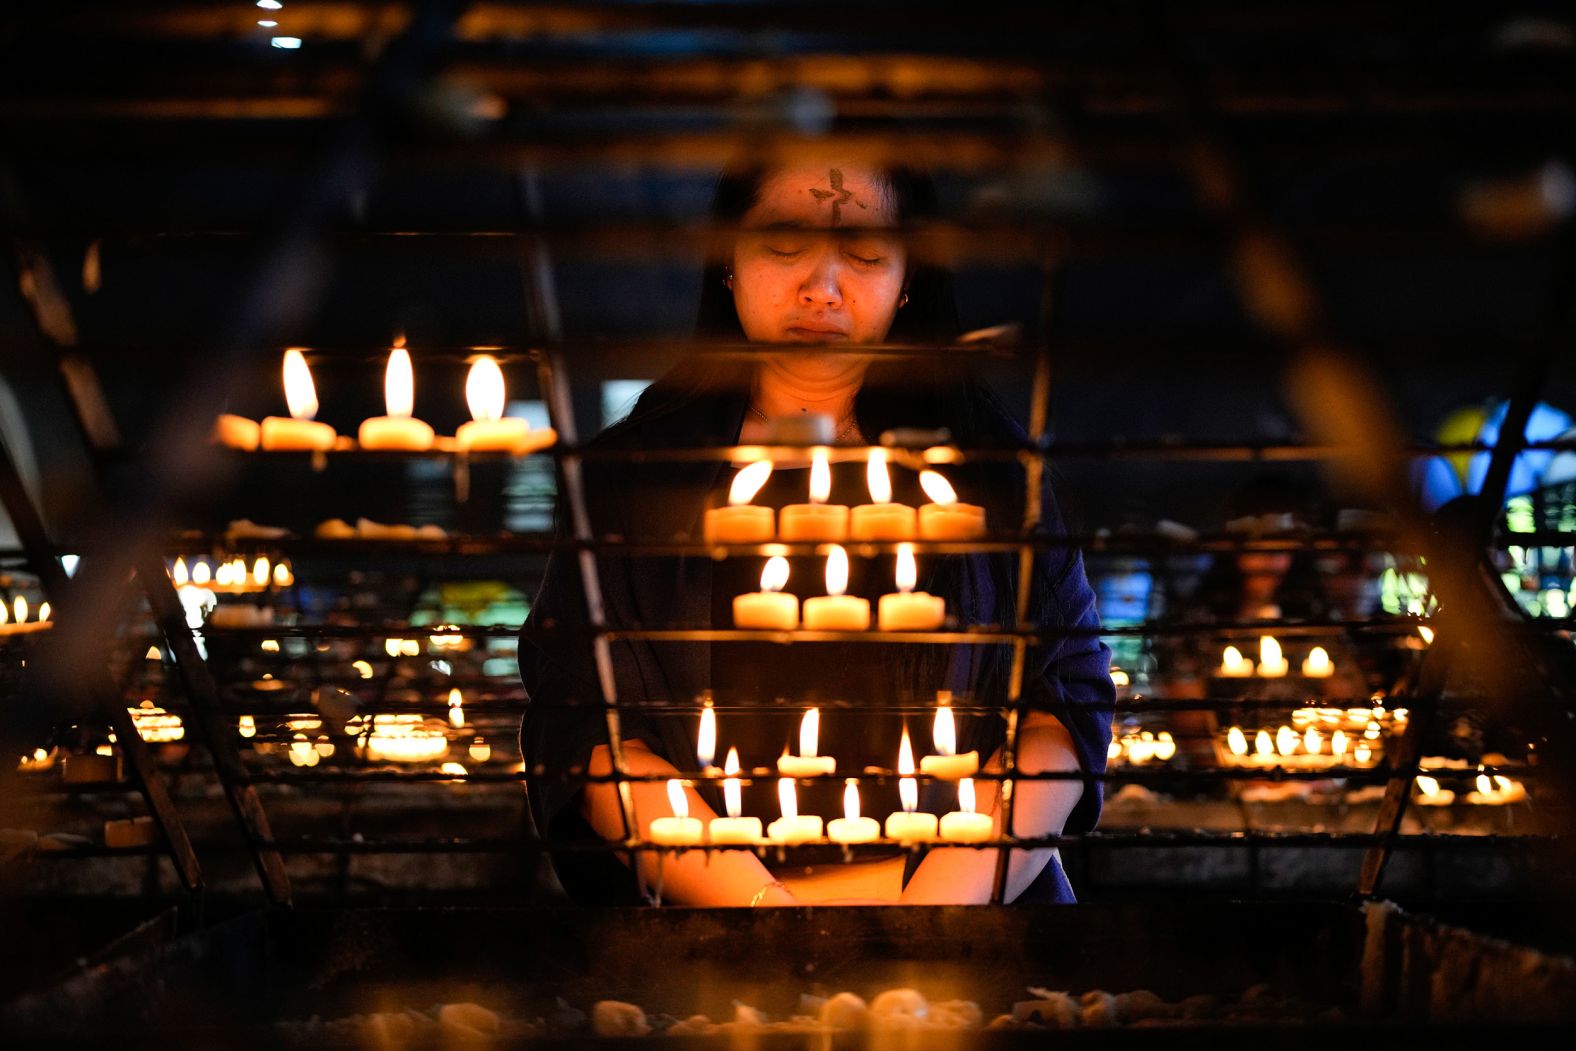 A woman prays at the Redemptorist Church in Manila, Philippines, during Ash Wednesday rites on February 14.